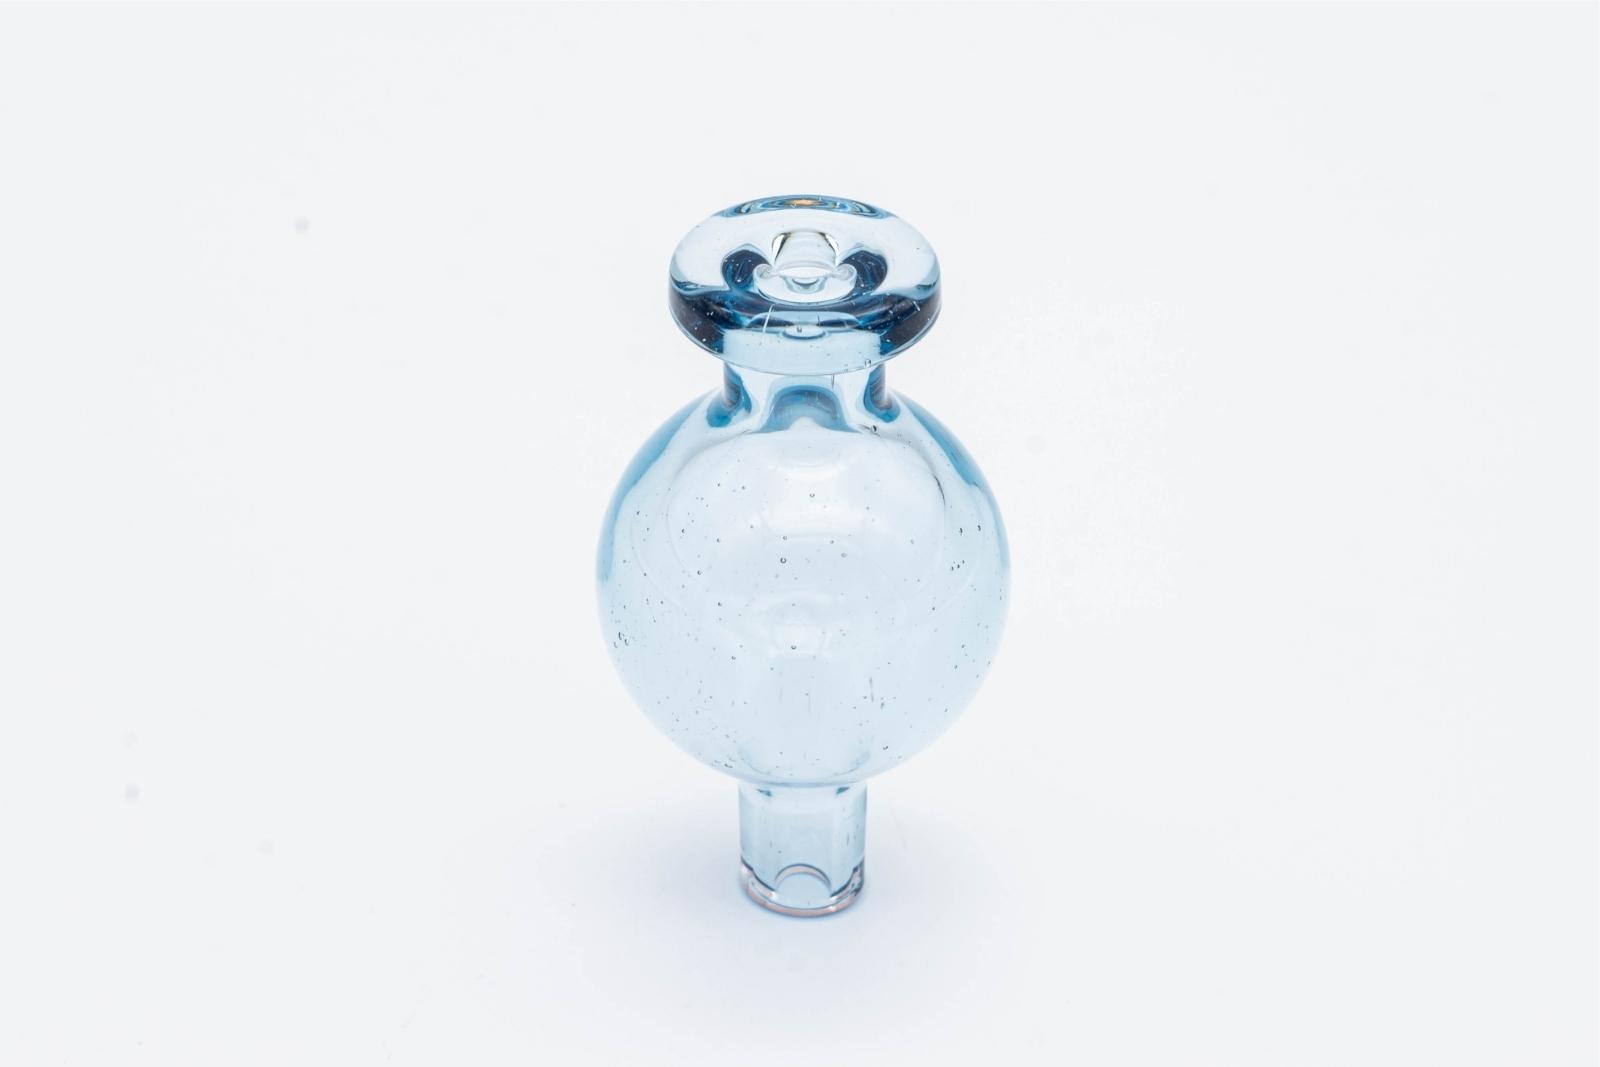 A blue bubble cap made by BorOregon, on a white background